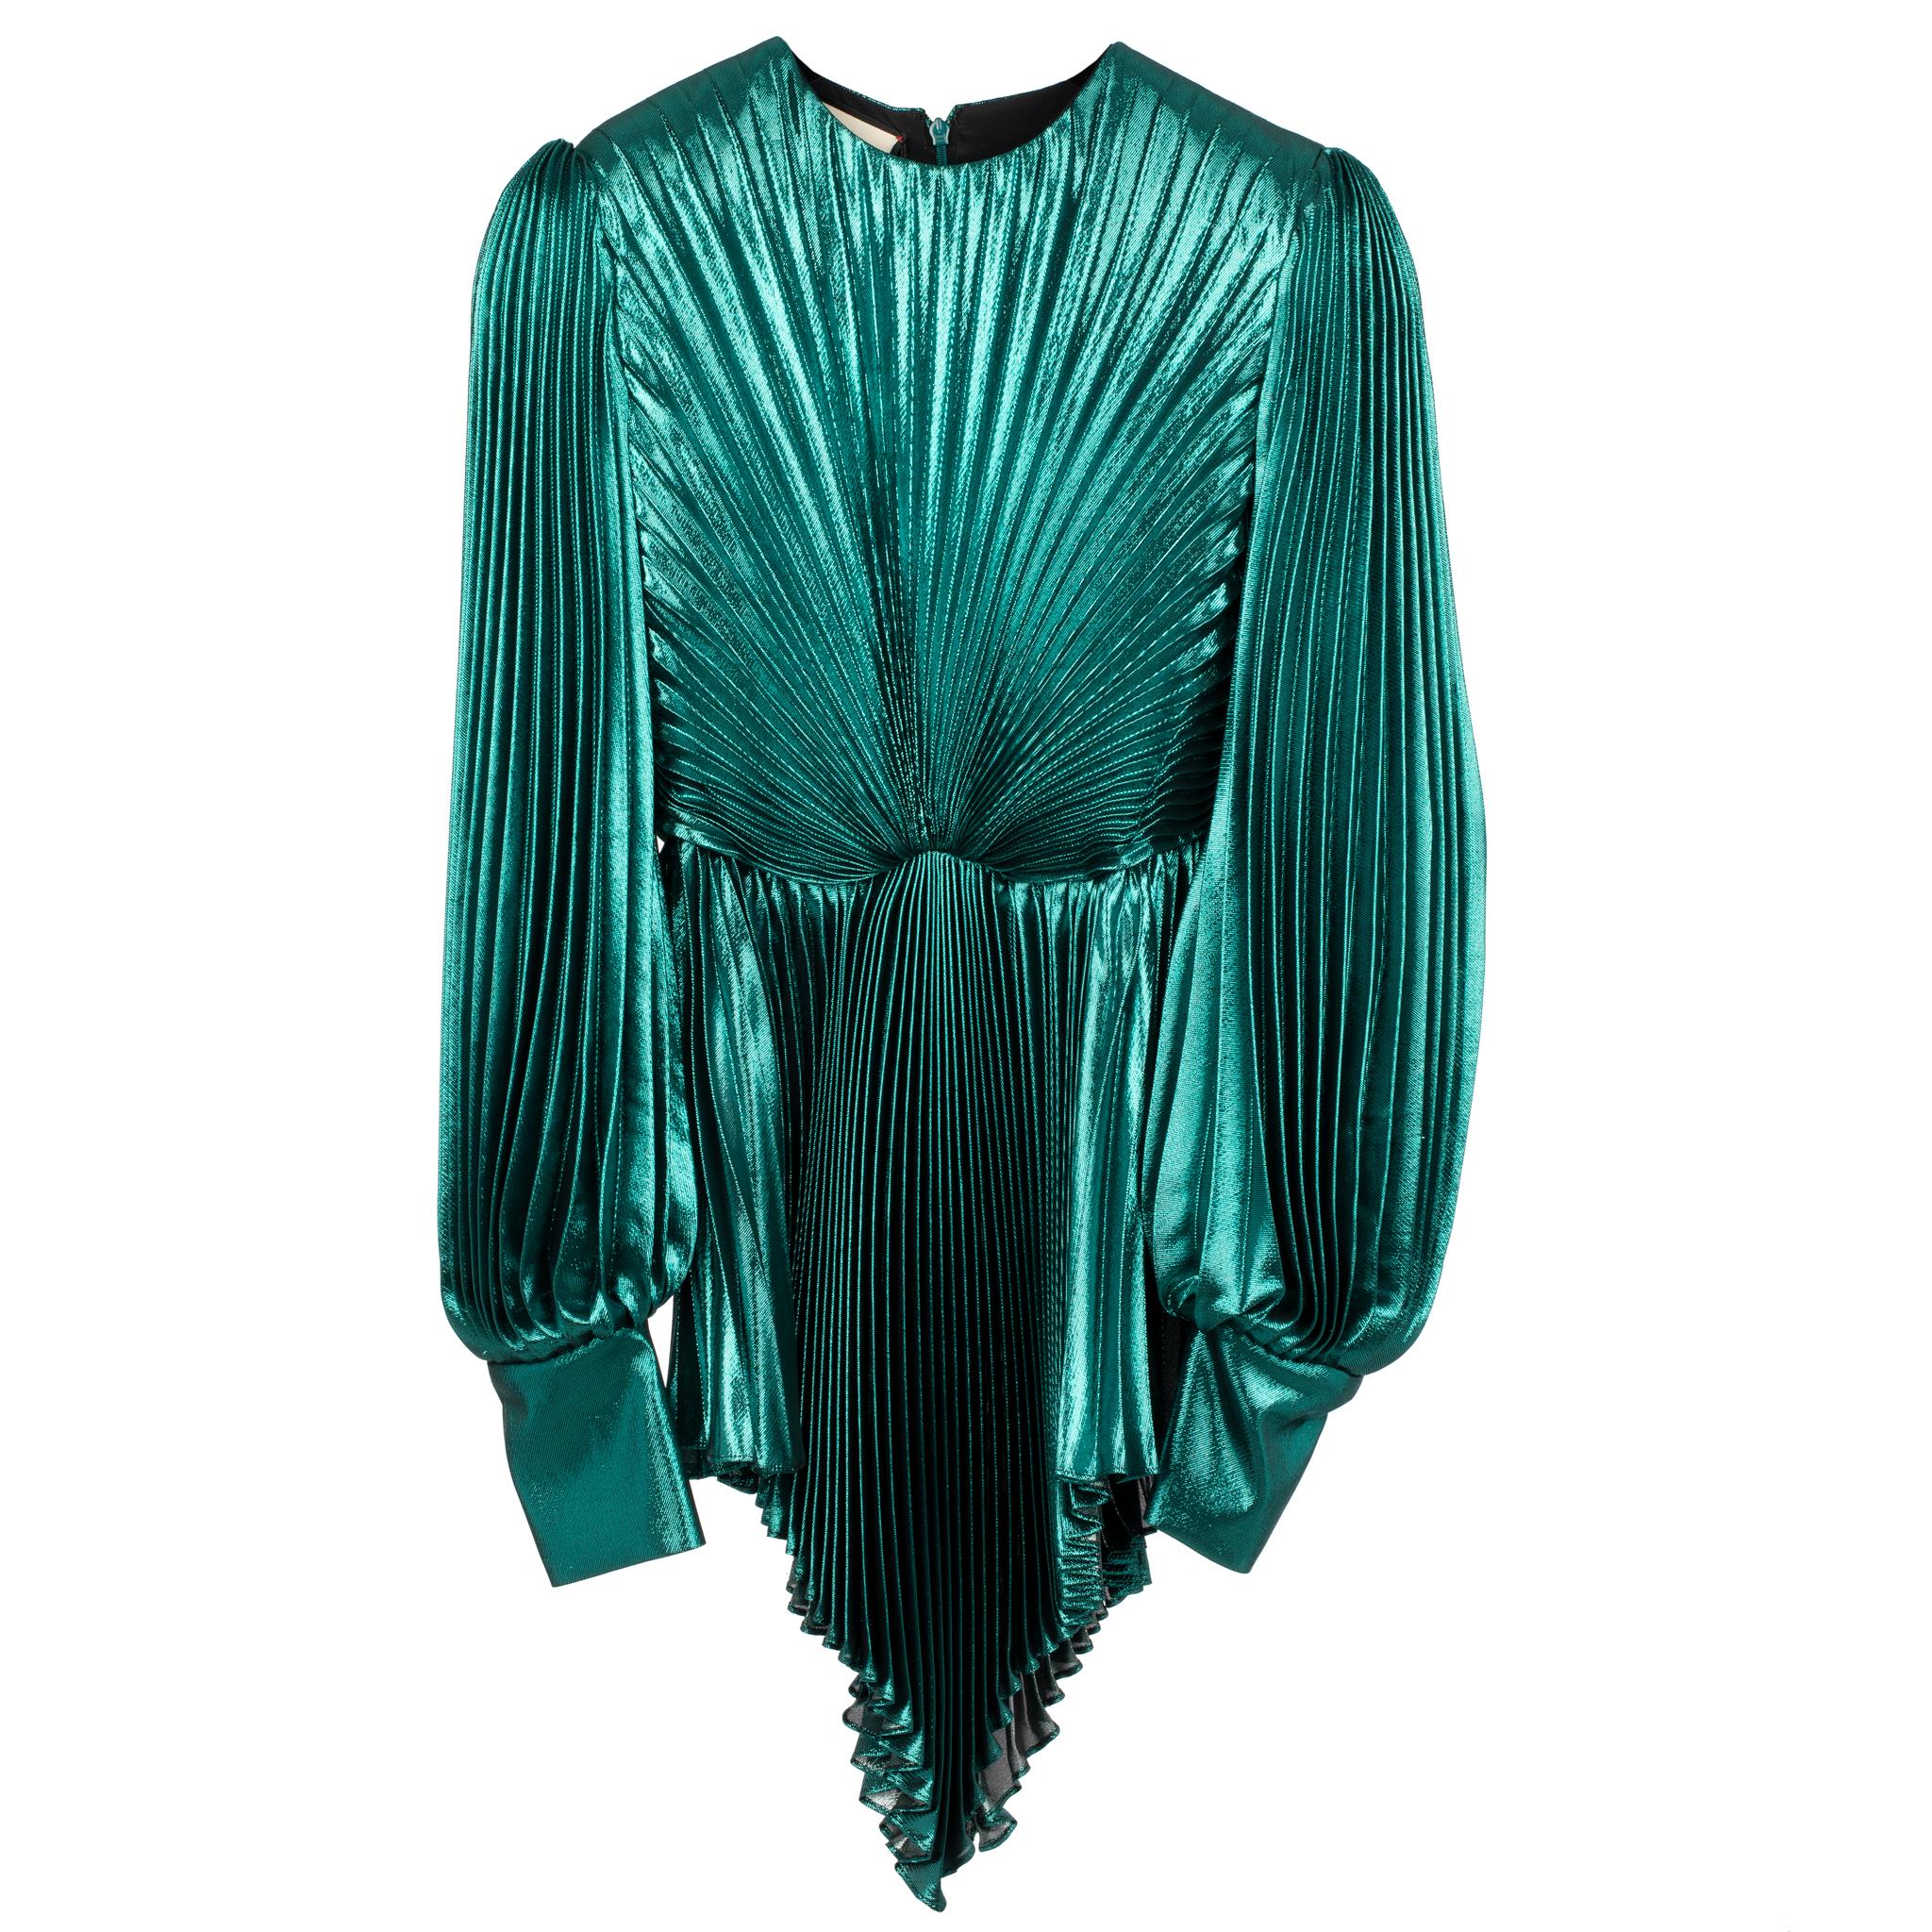 Brand:

Gucci

Product:

Pleated Silk Blend Mini Dress 

Size:

38 It

Colour:

Emerald Green

Material

Silk 65% & Polyester 35%

Condition:

Pristine; New Or Never Worn

Details

- Round Neckline

- Long Balloon Sleeves

- Concealed Back Zip